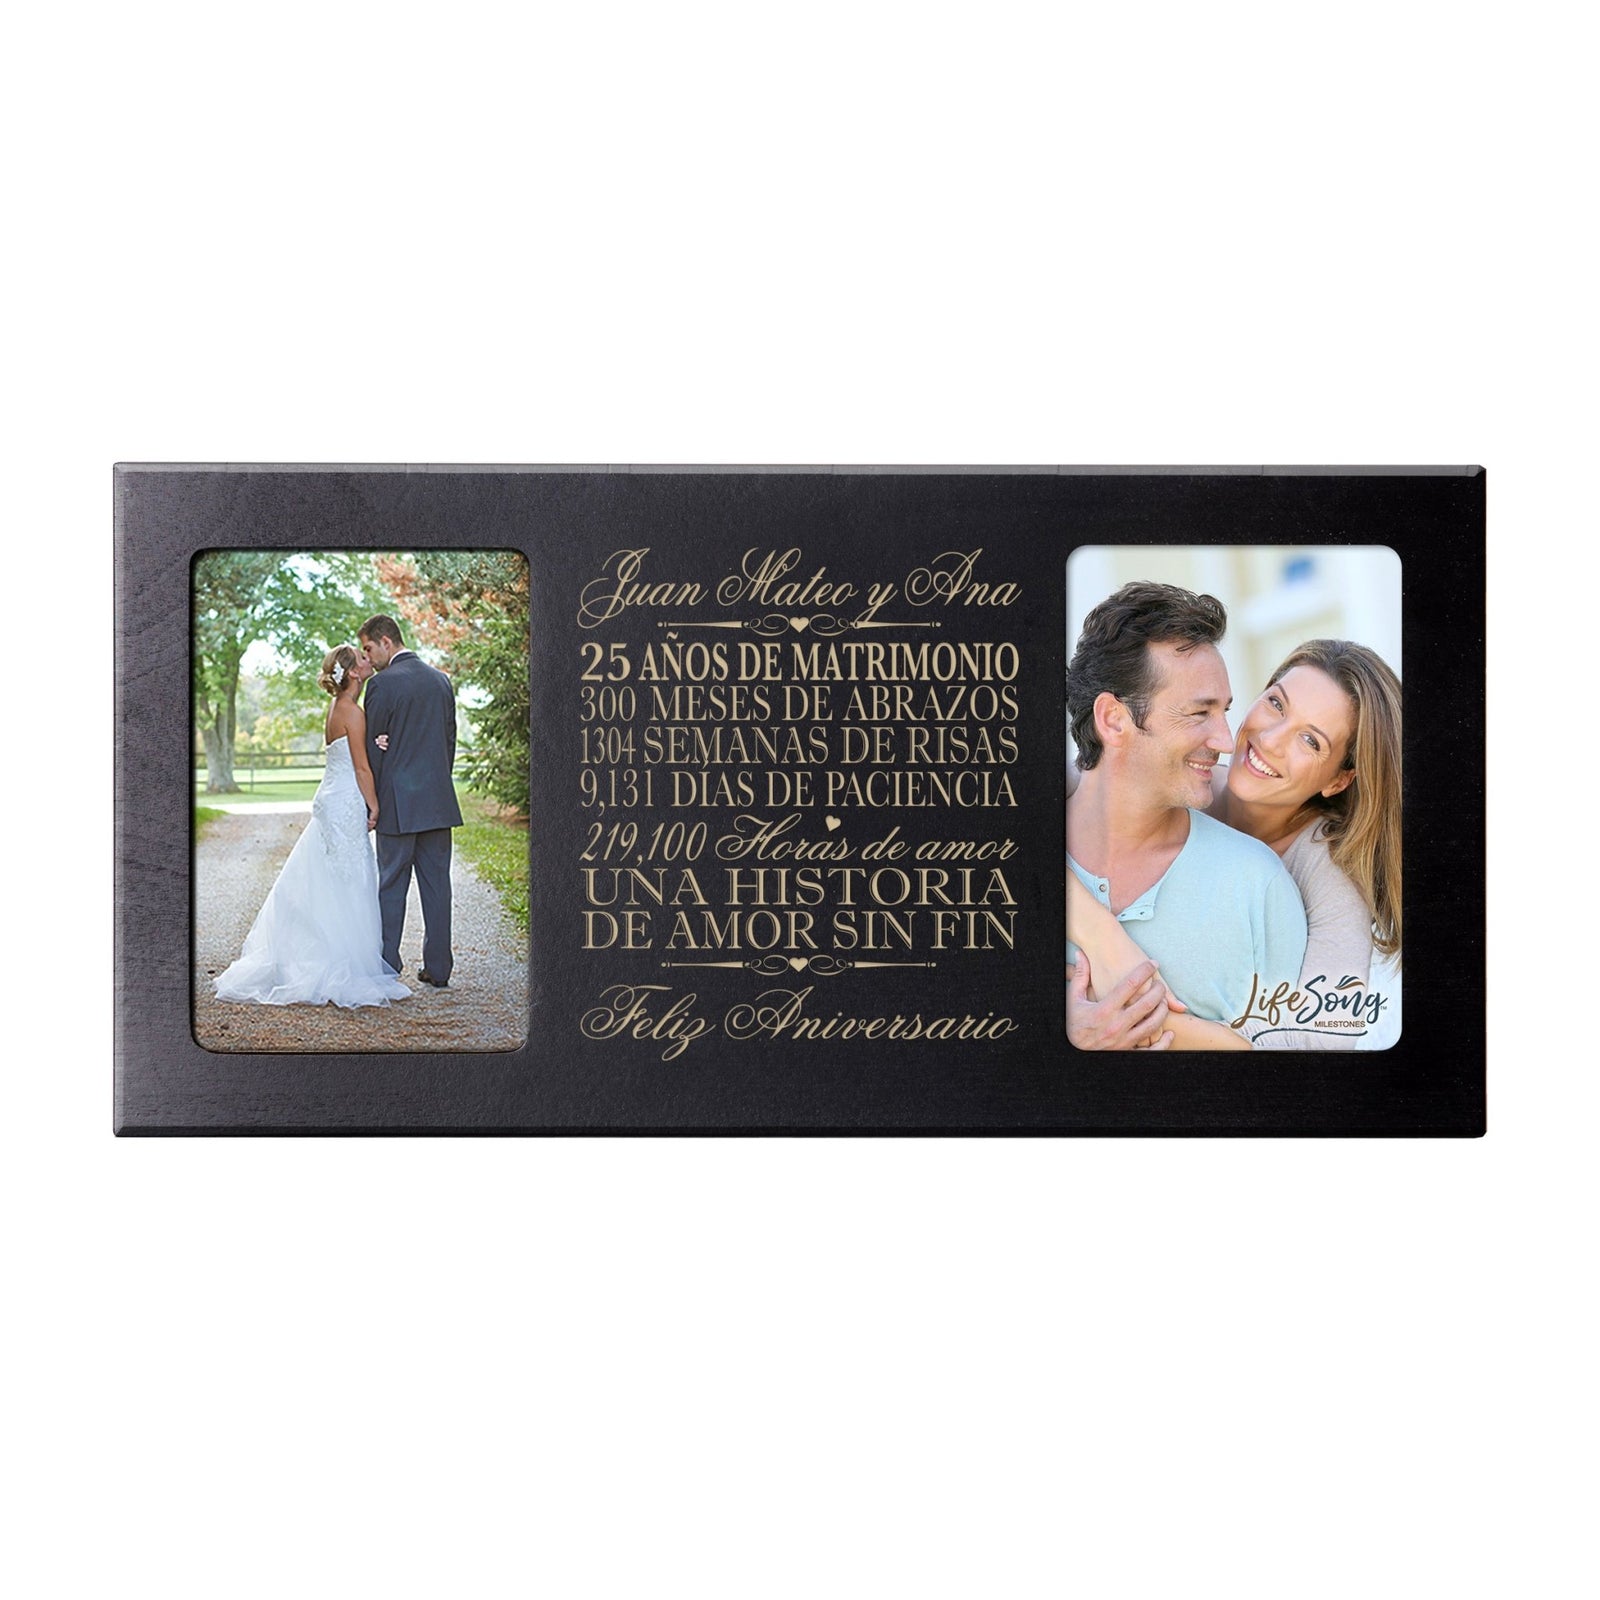 Lifesong Milestones Personalized 25th Wedding Anniversary Spanish Picture Frame